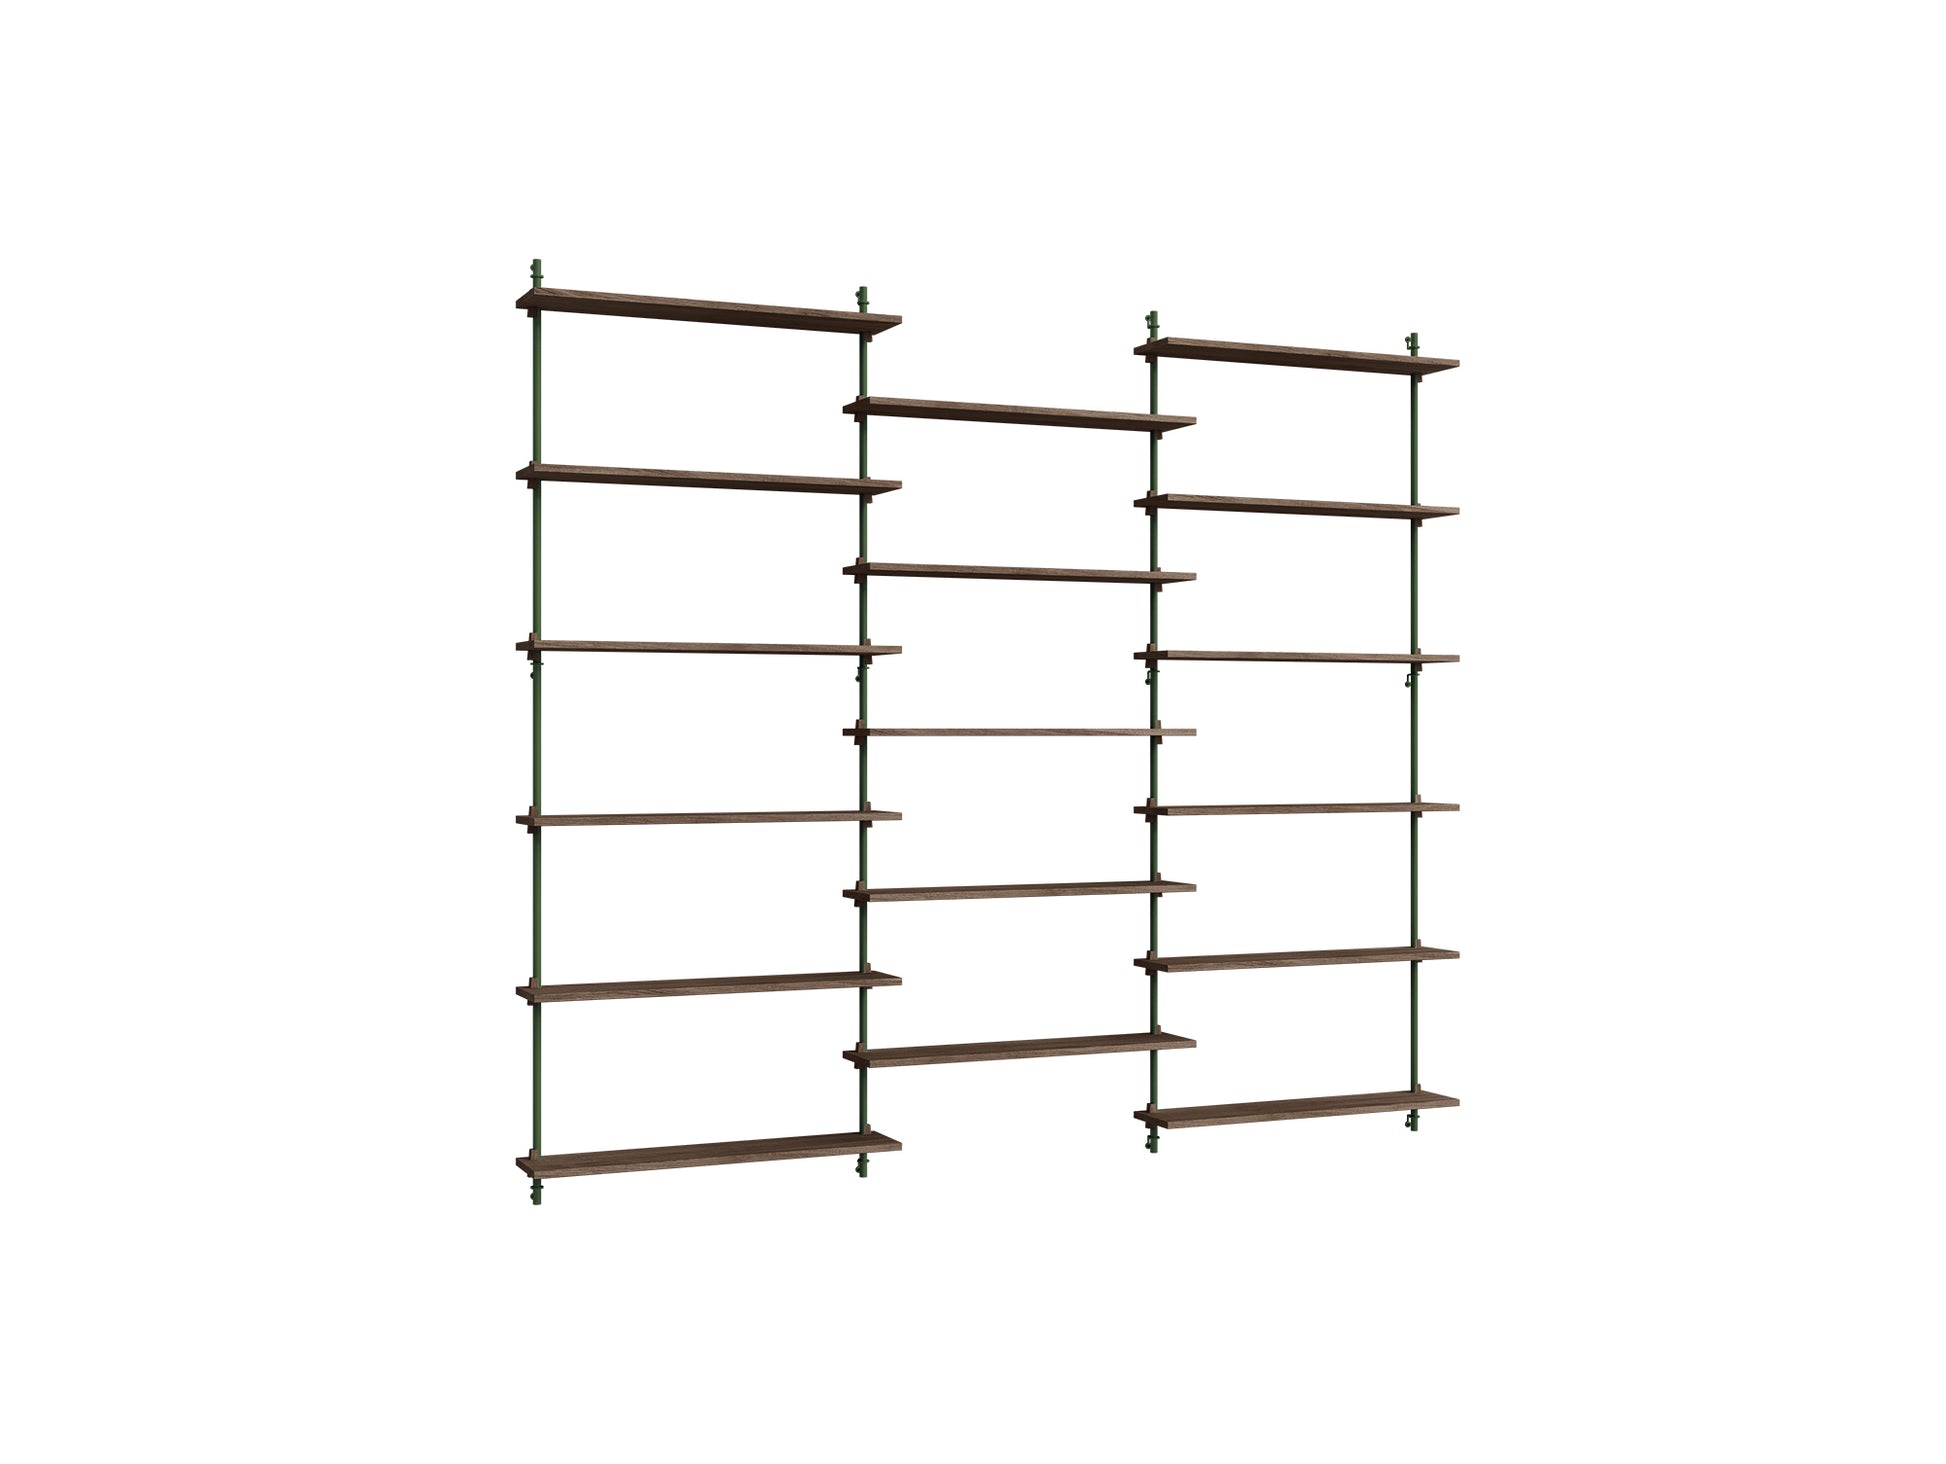 Wall Shelving System Sets (200 cm) by Moebe - WS.200.3 / Pine Green Uprights / Smoked Oak